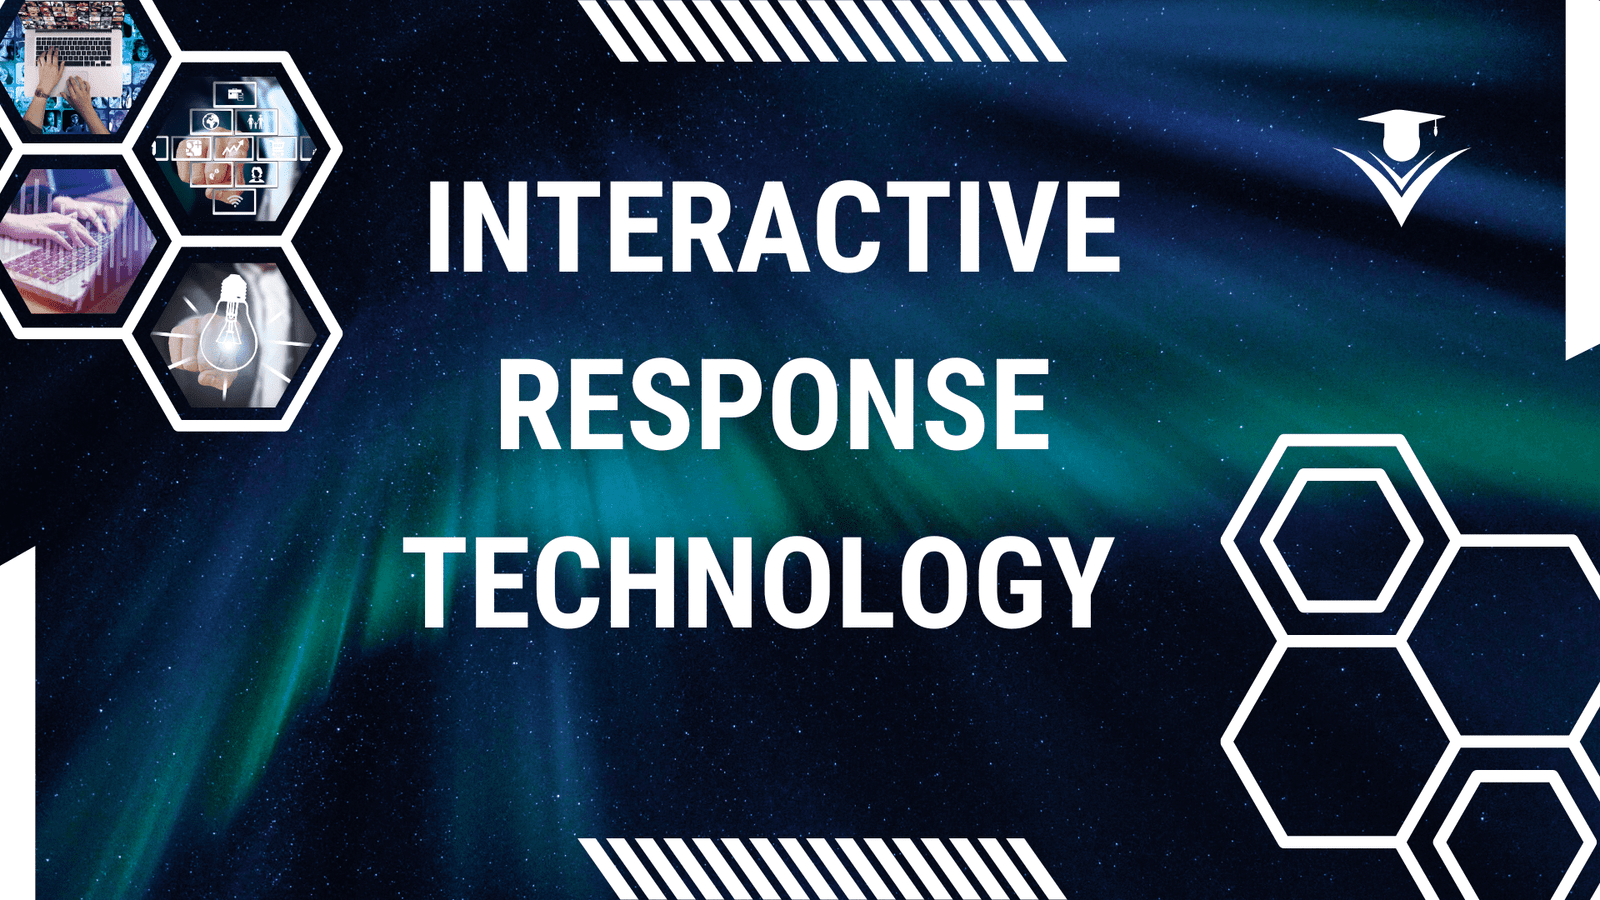 Interactive Response Technology refers to the use of multiple devices to communicate with worldwide individuals, like Android mobiles, PCs, tablets, and laptops as well.